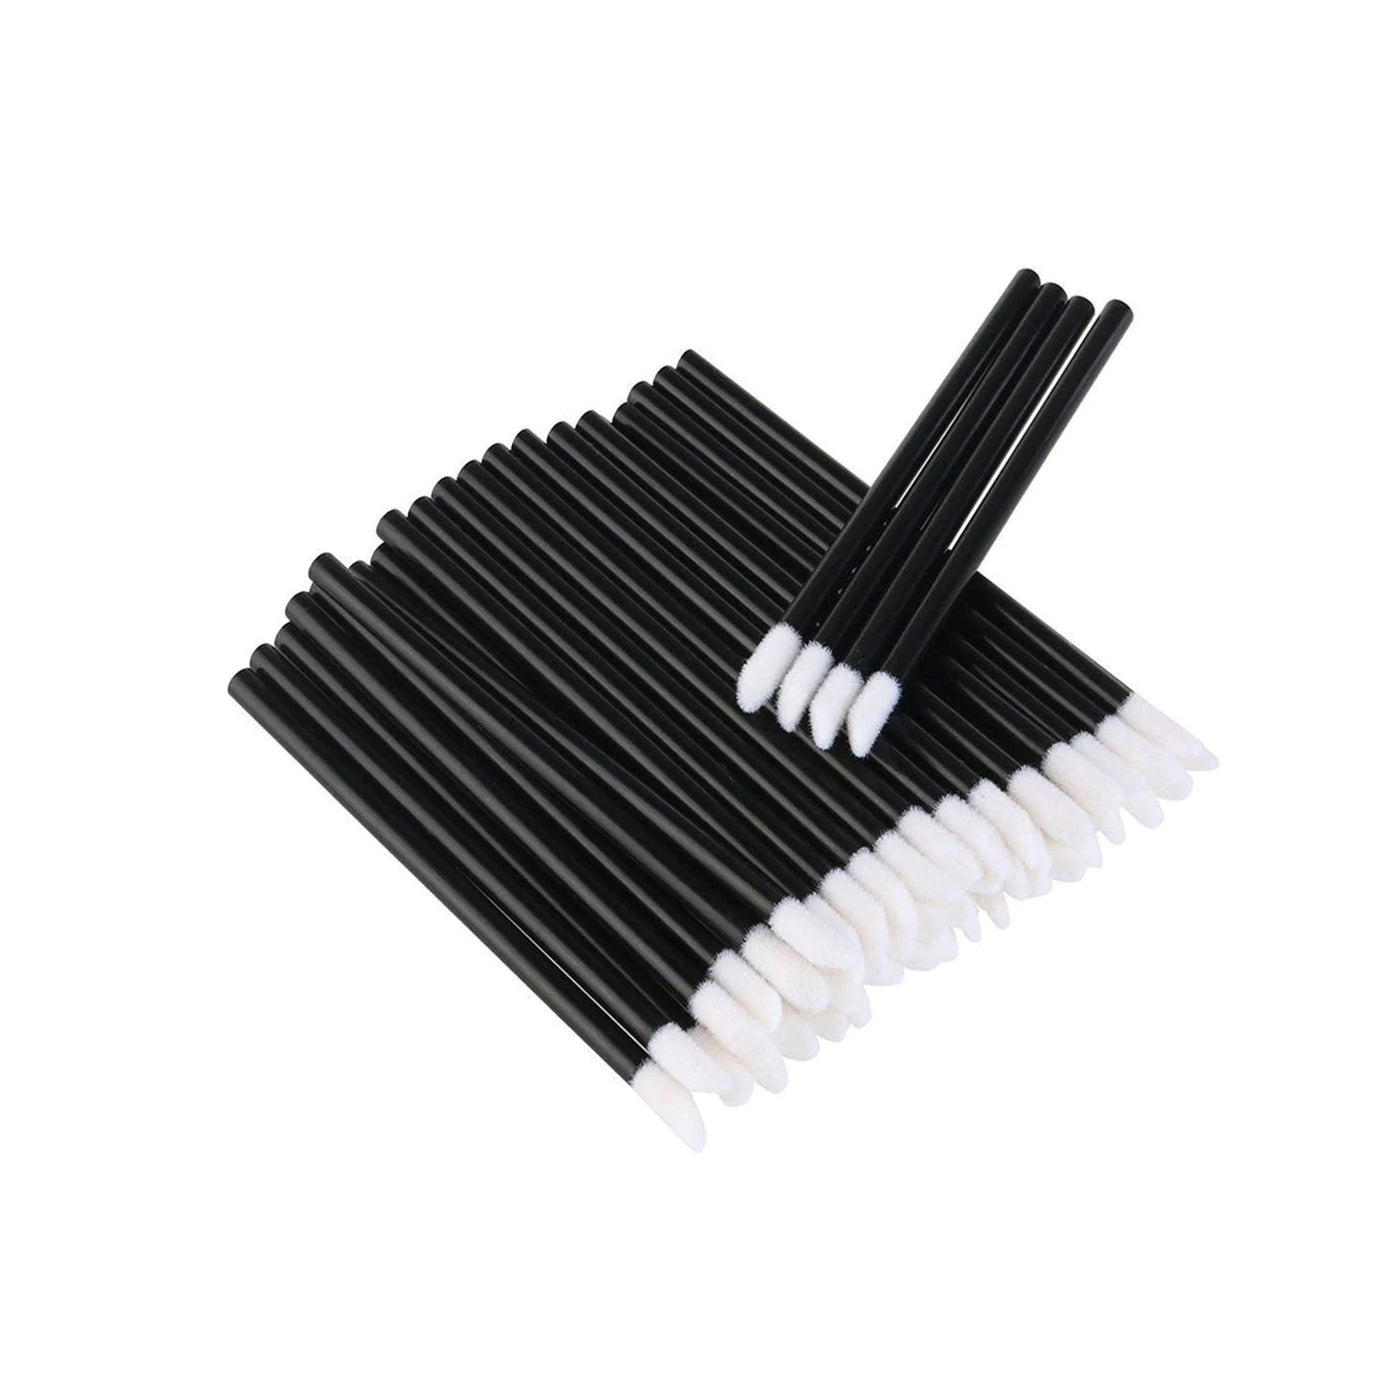 Black Perm and Lip Applicators - 50 pack - The London Brow Company